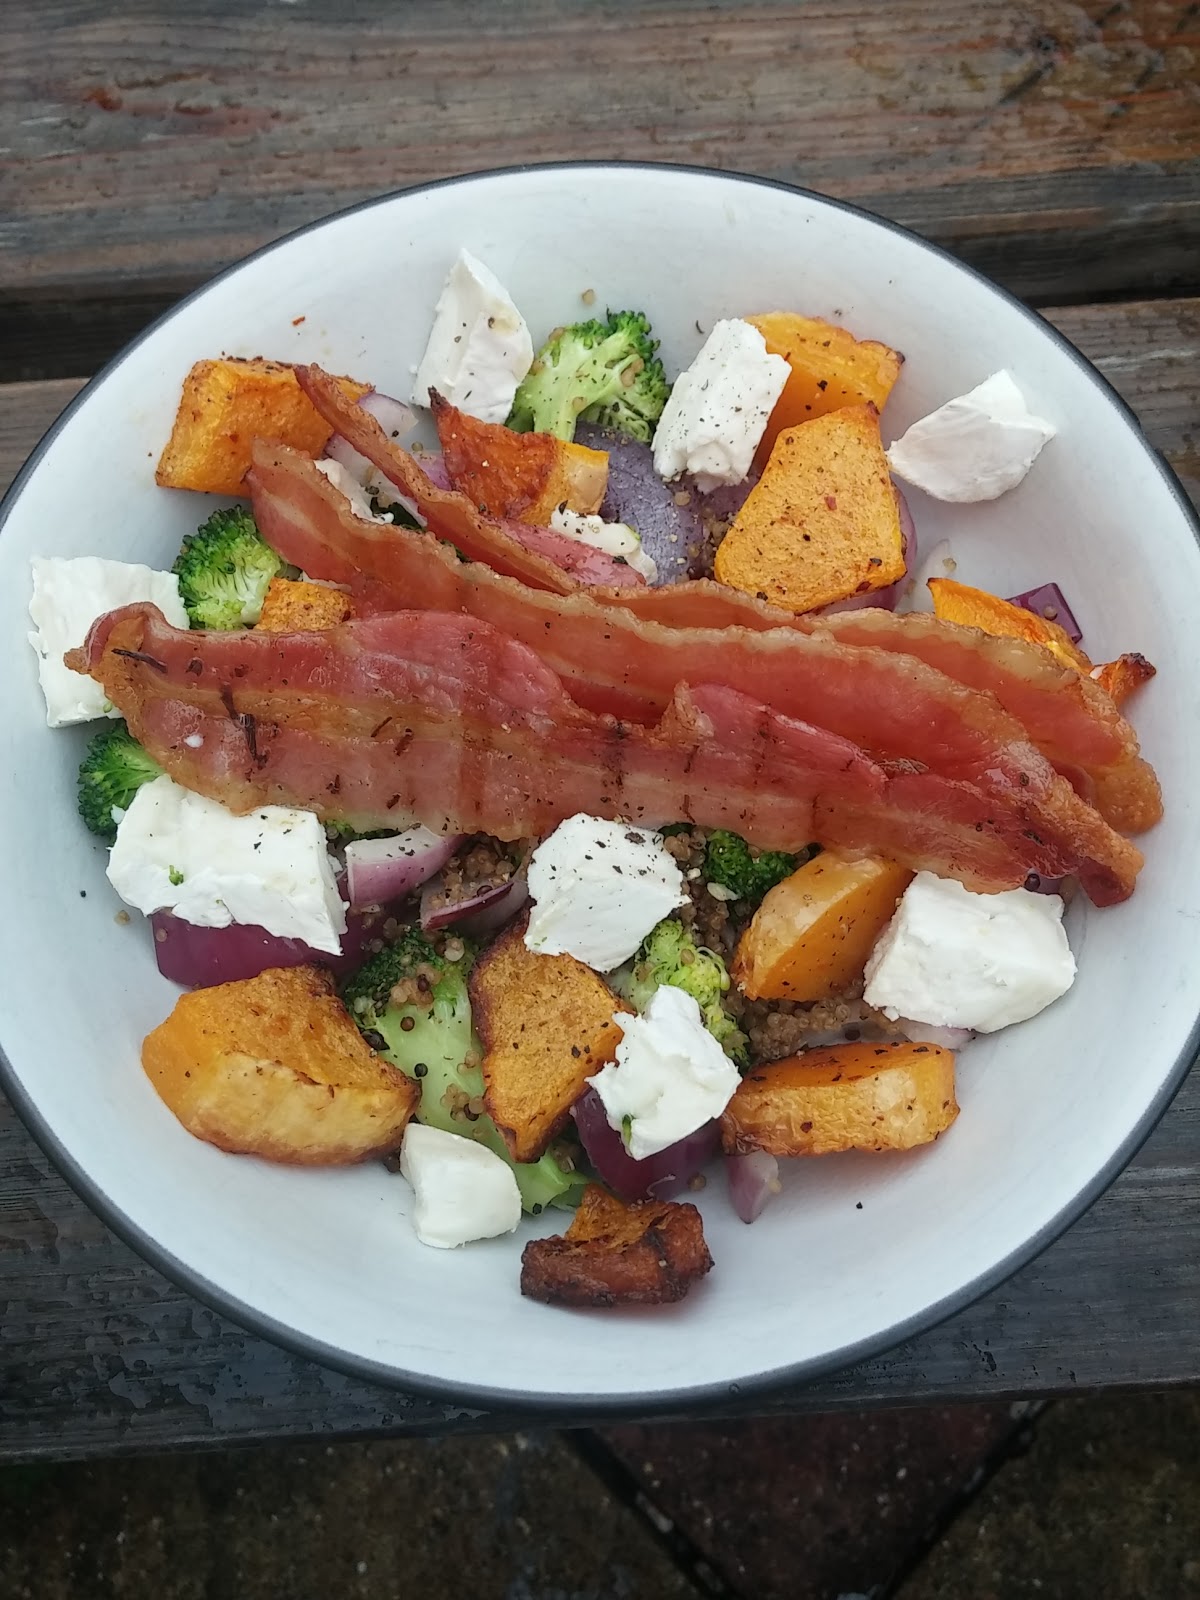 Roasted butternut squash, broccoli, red onion, creamy goat's cheese, finished with crispy bacon and sesame oil